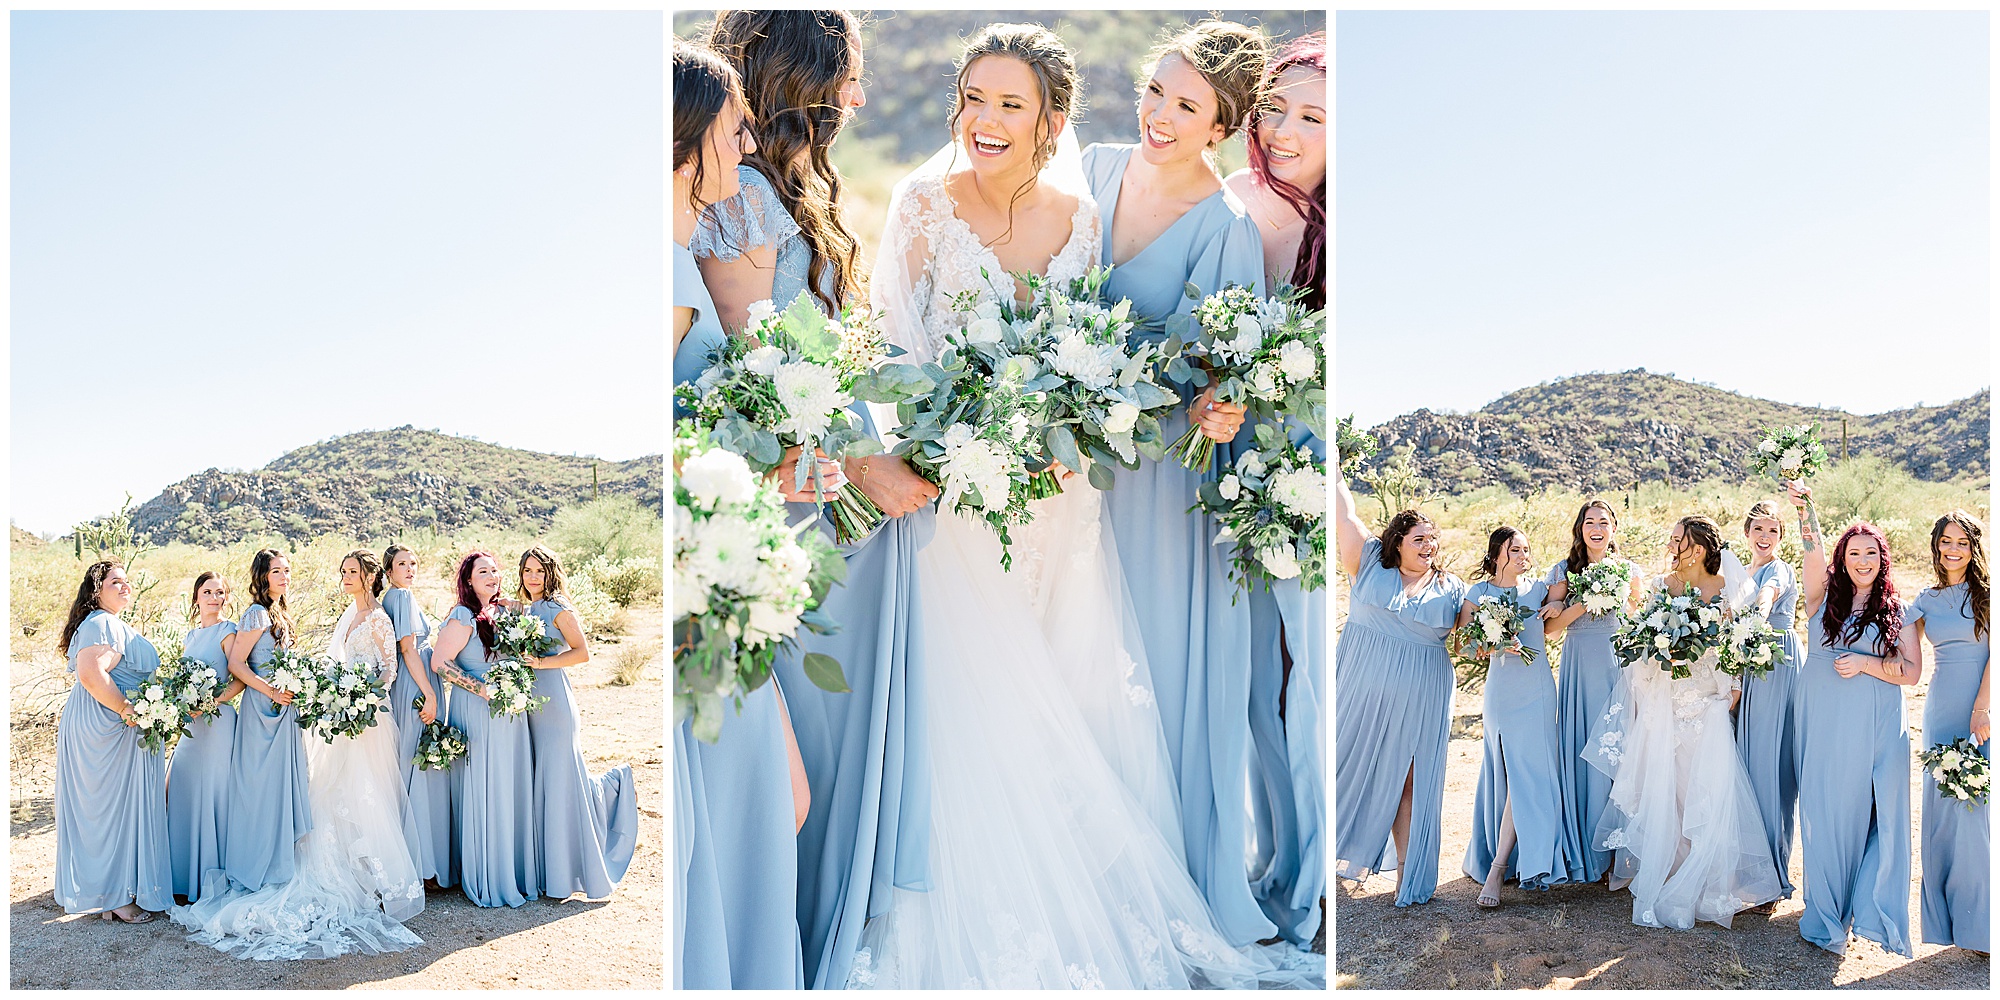 Mismatched Bridesmaid Dresses, Our How to Guide